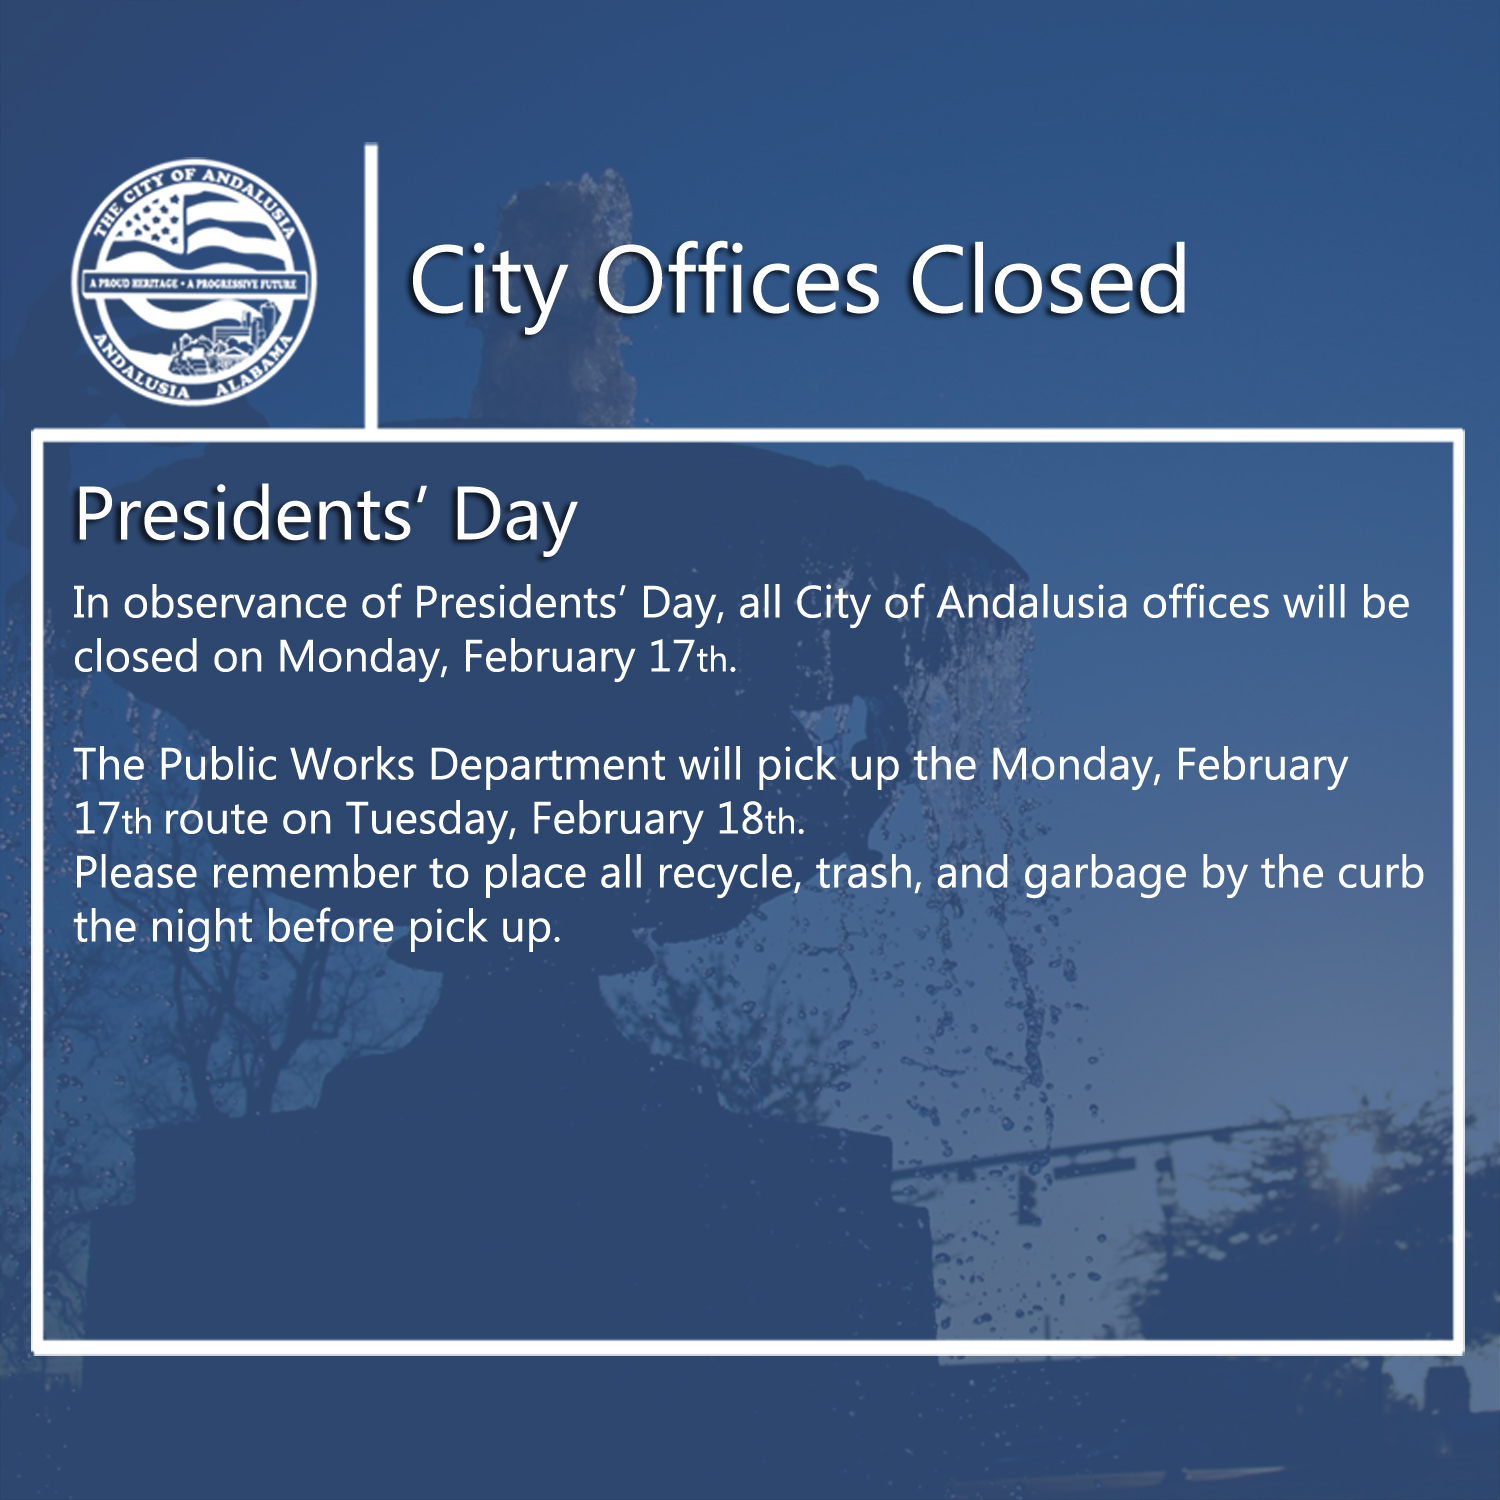 Facebook City Offices Closed February 17th